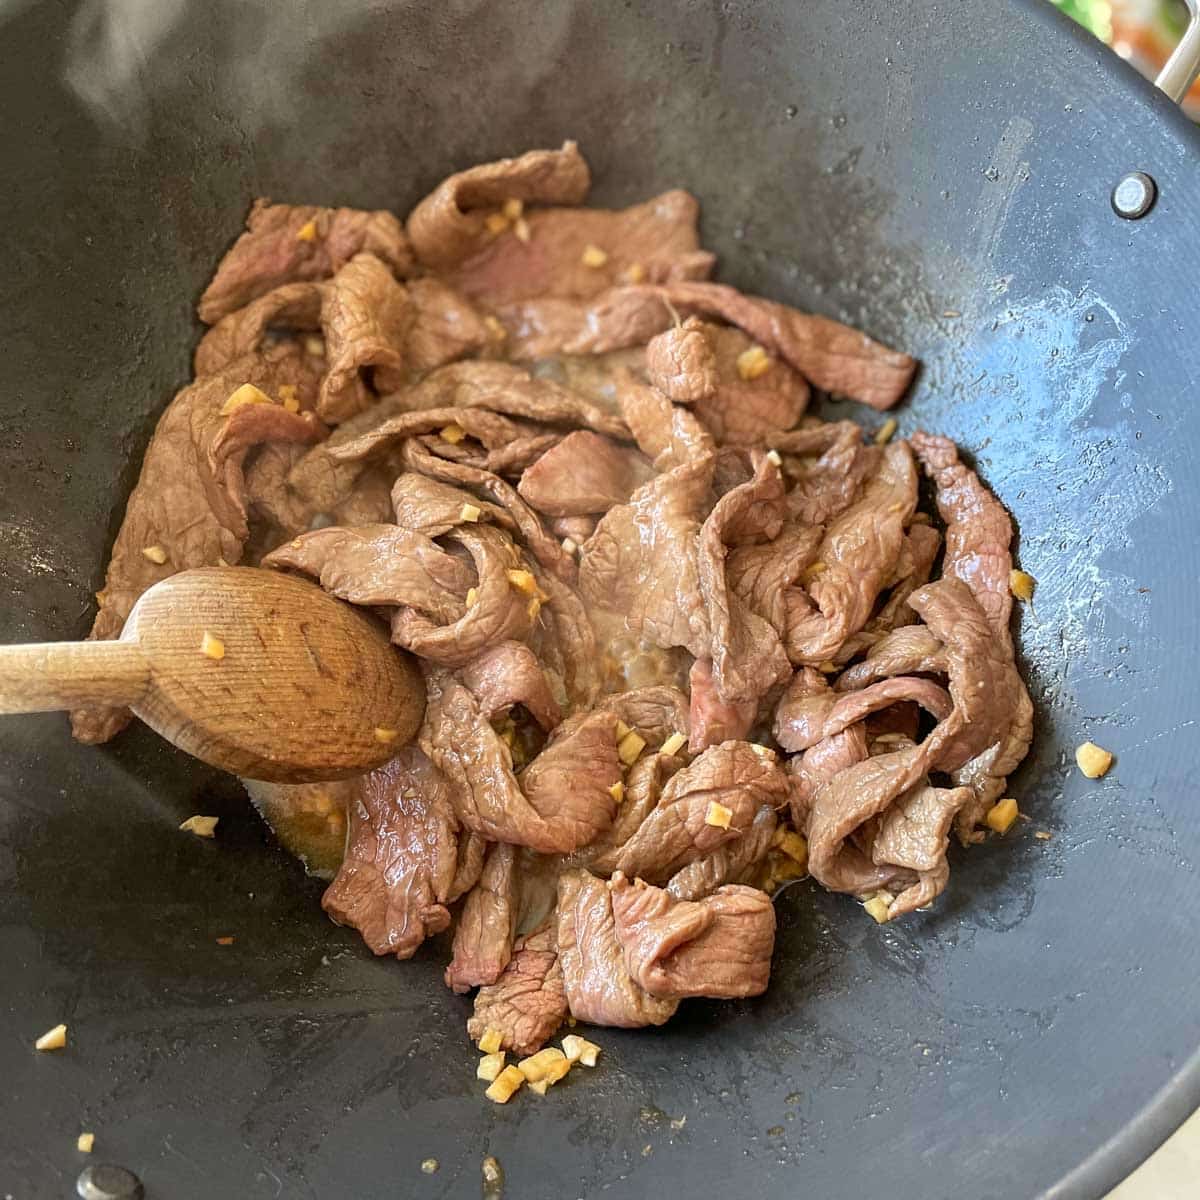 Thinly sliced beef is stirred in a black wok with a wooden spoon.